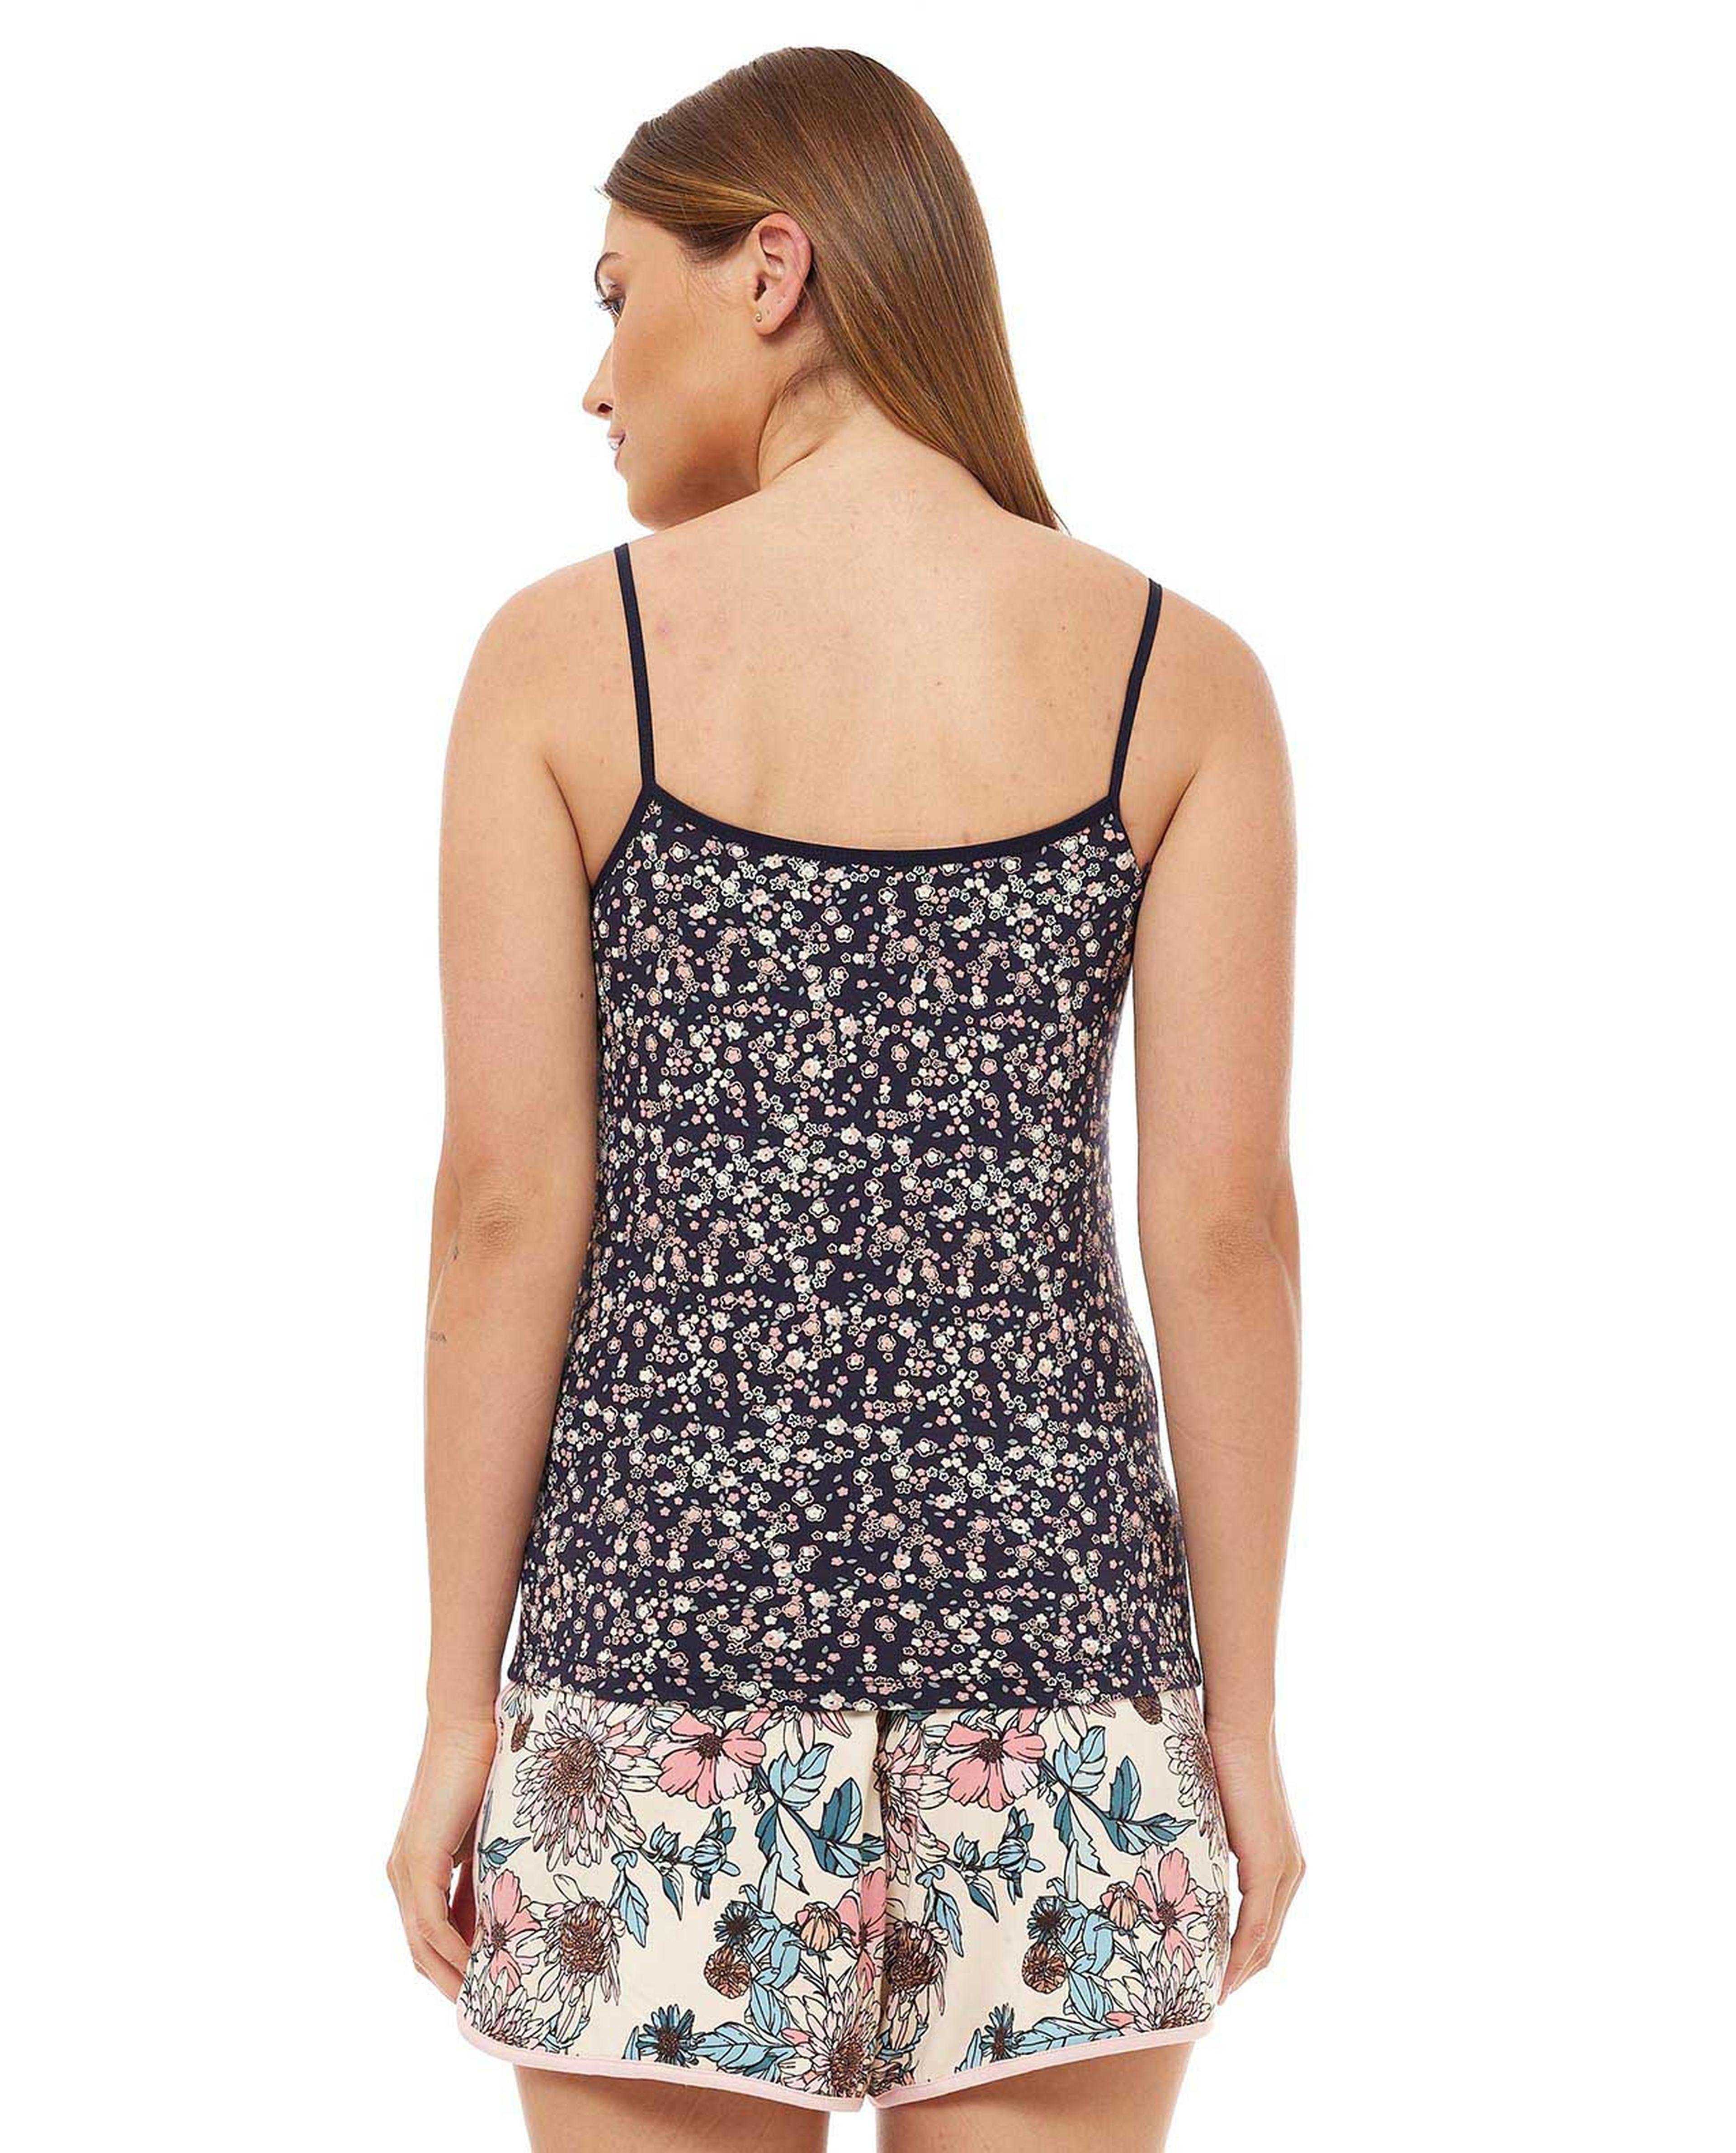 Floral Print Camisole